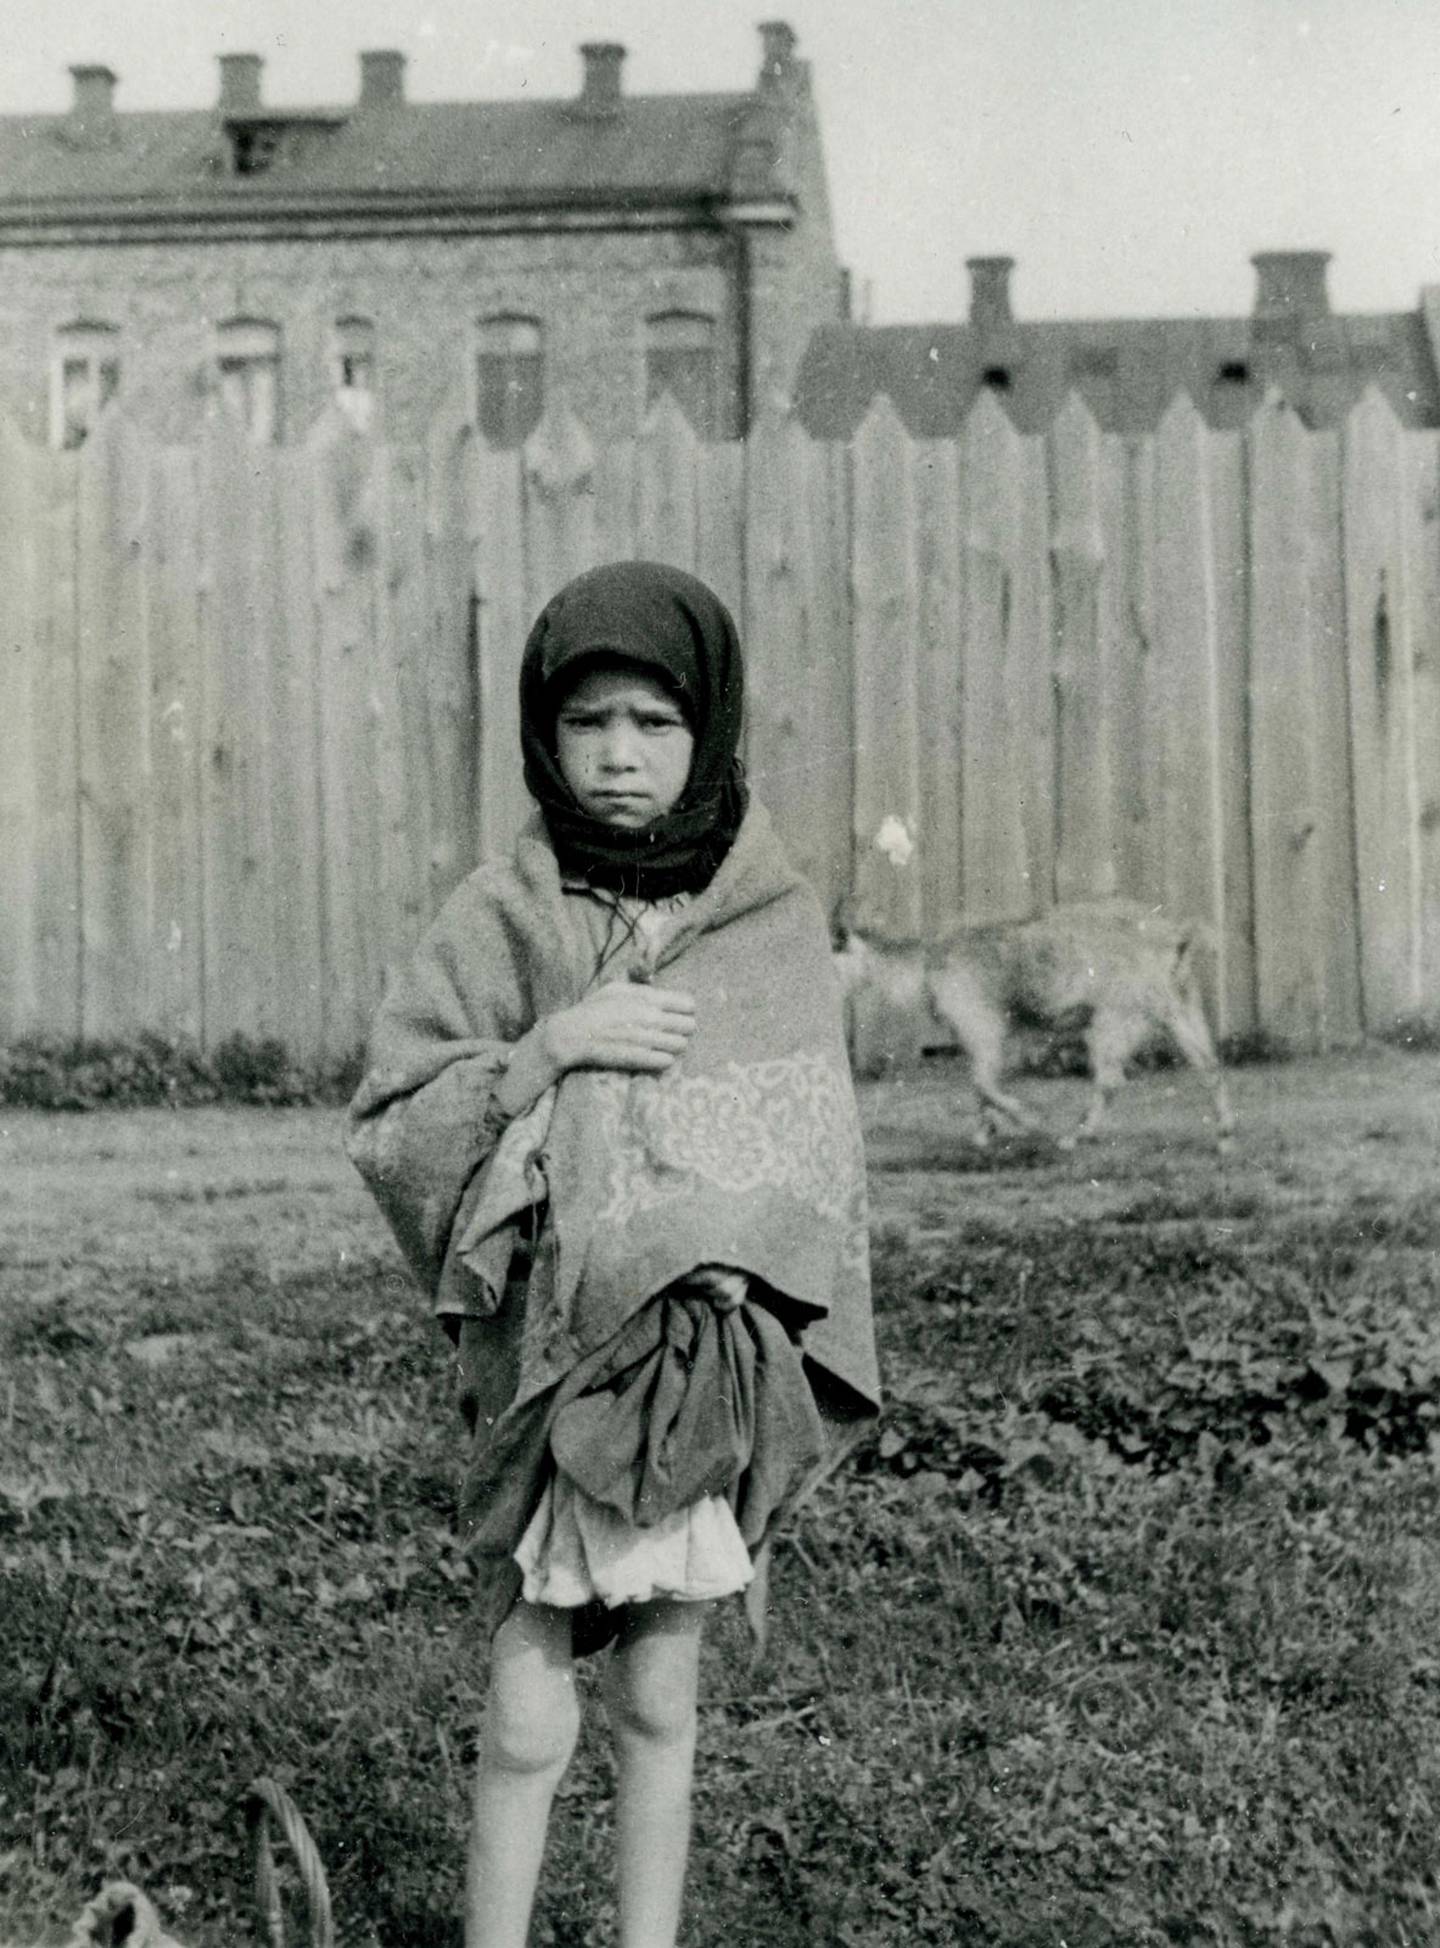 Child with signs of starvation on the streets of Kharkiv, Diocesan Archive of Vienna.
Date	1933
Source	Diocesan Archive of Vienna (Diözesanarchiv Wien)/BA Innitzer